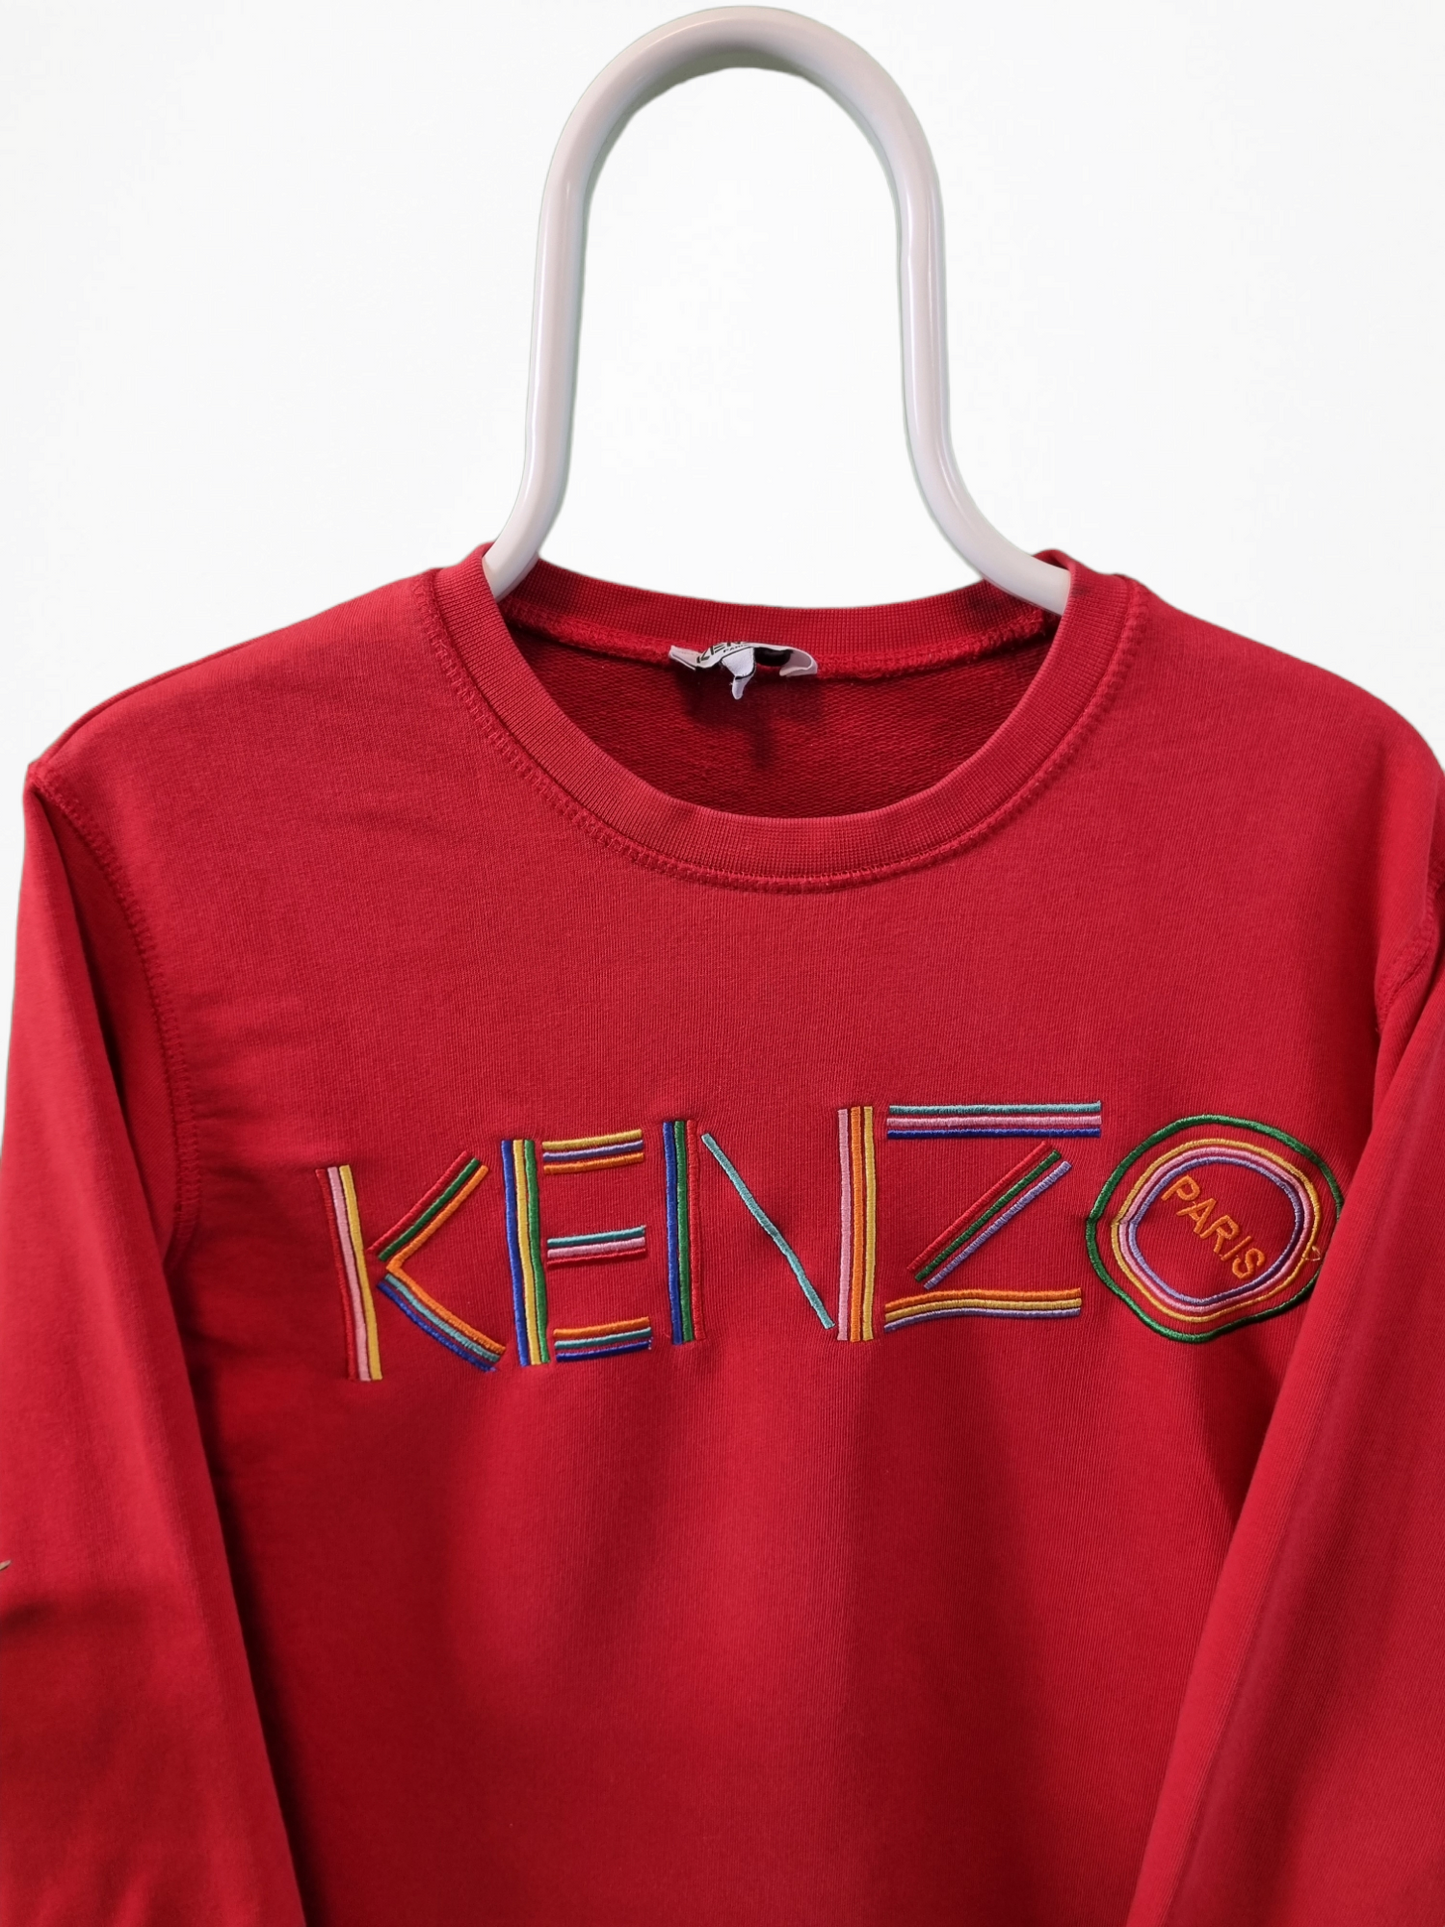 Kenzo embroidered text sweater maat M